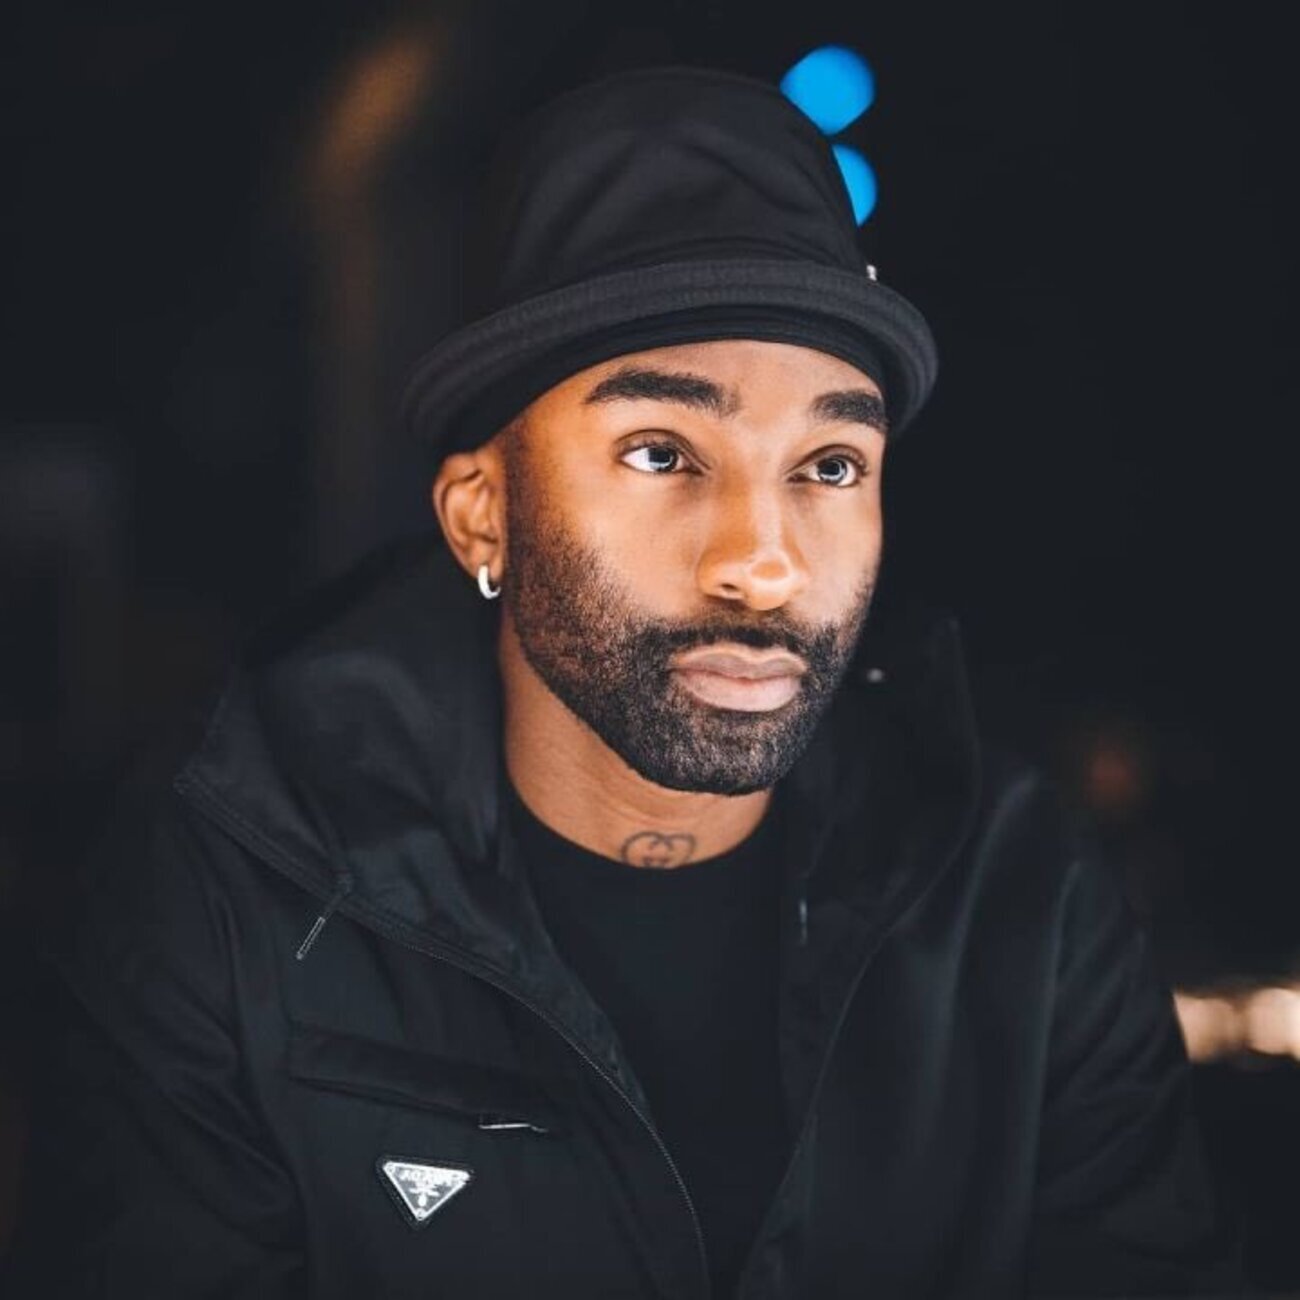 The Life and Times Of Riky Rick: A Biography